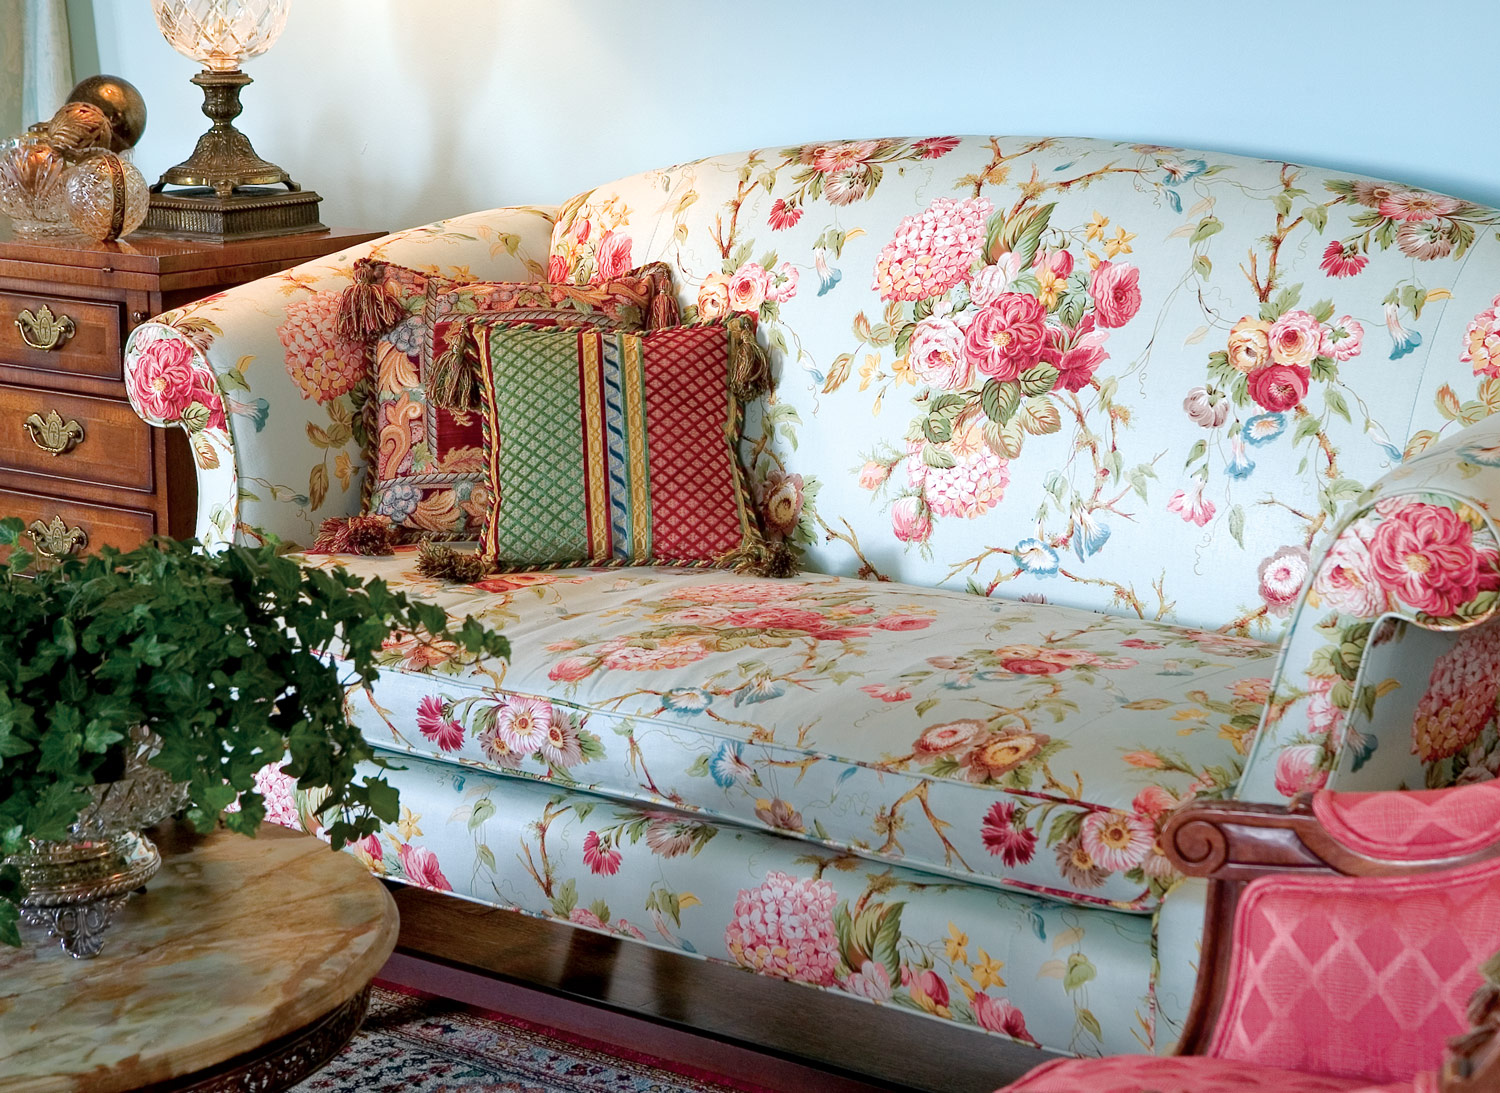 roses floral sofa classic cottage living rose embellish style using décor furniture country shabby chic decorative sofas lady southernladymagazine room